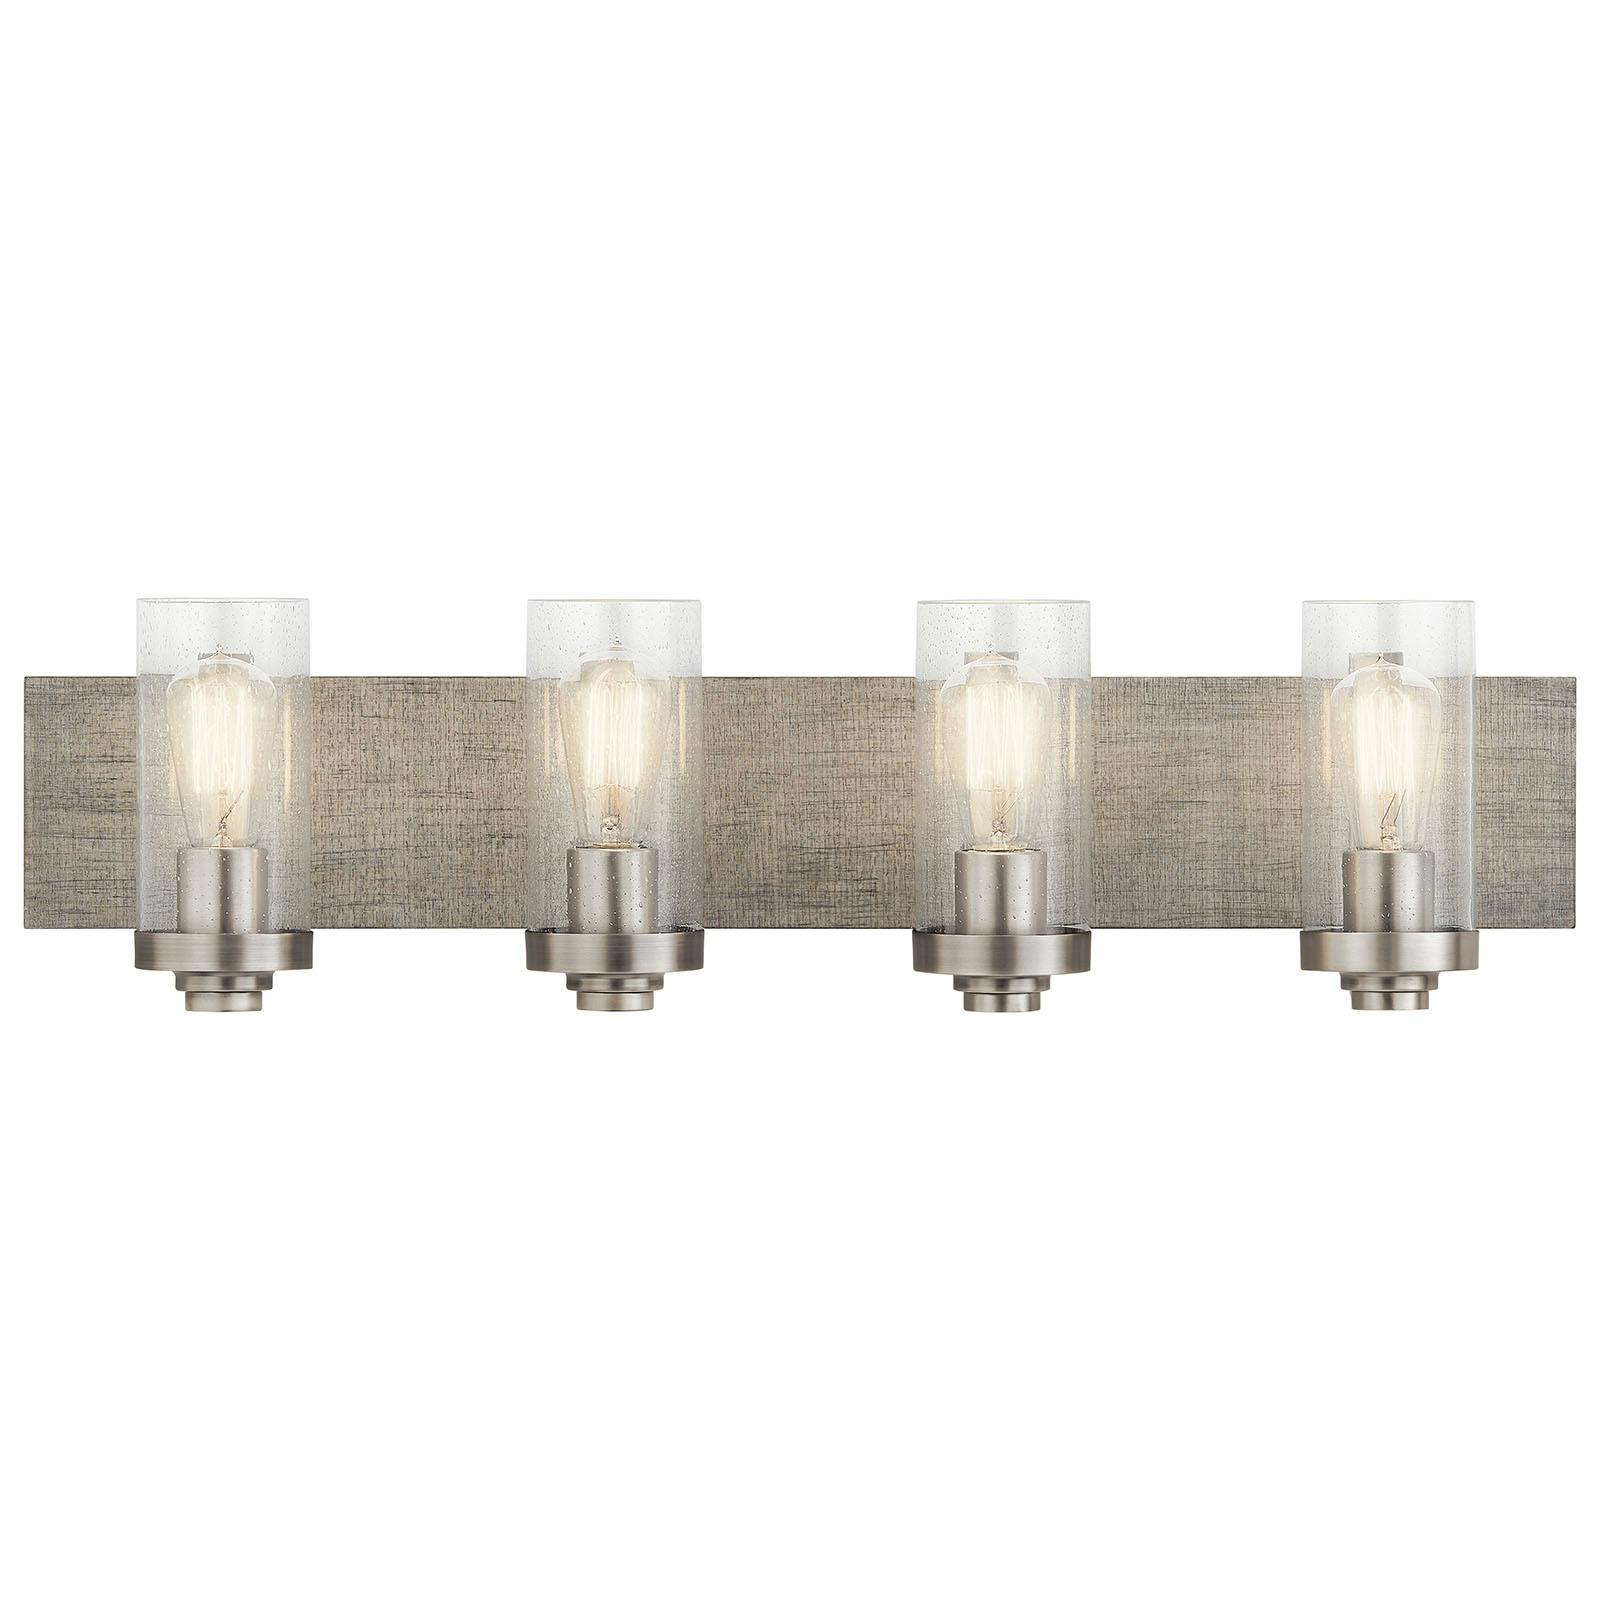 The Dalwood 4 Light Vanity Light Pewter facing up on a white background